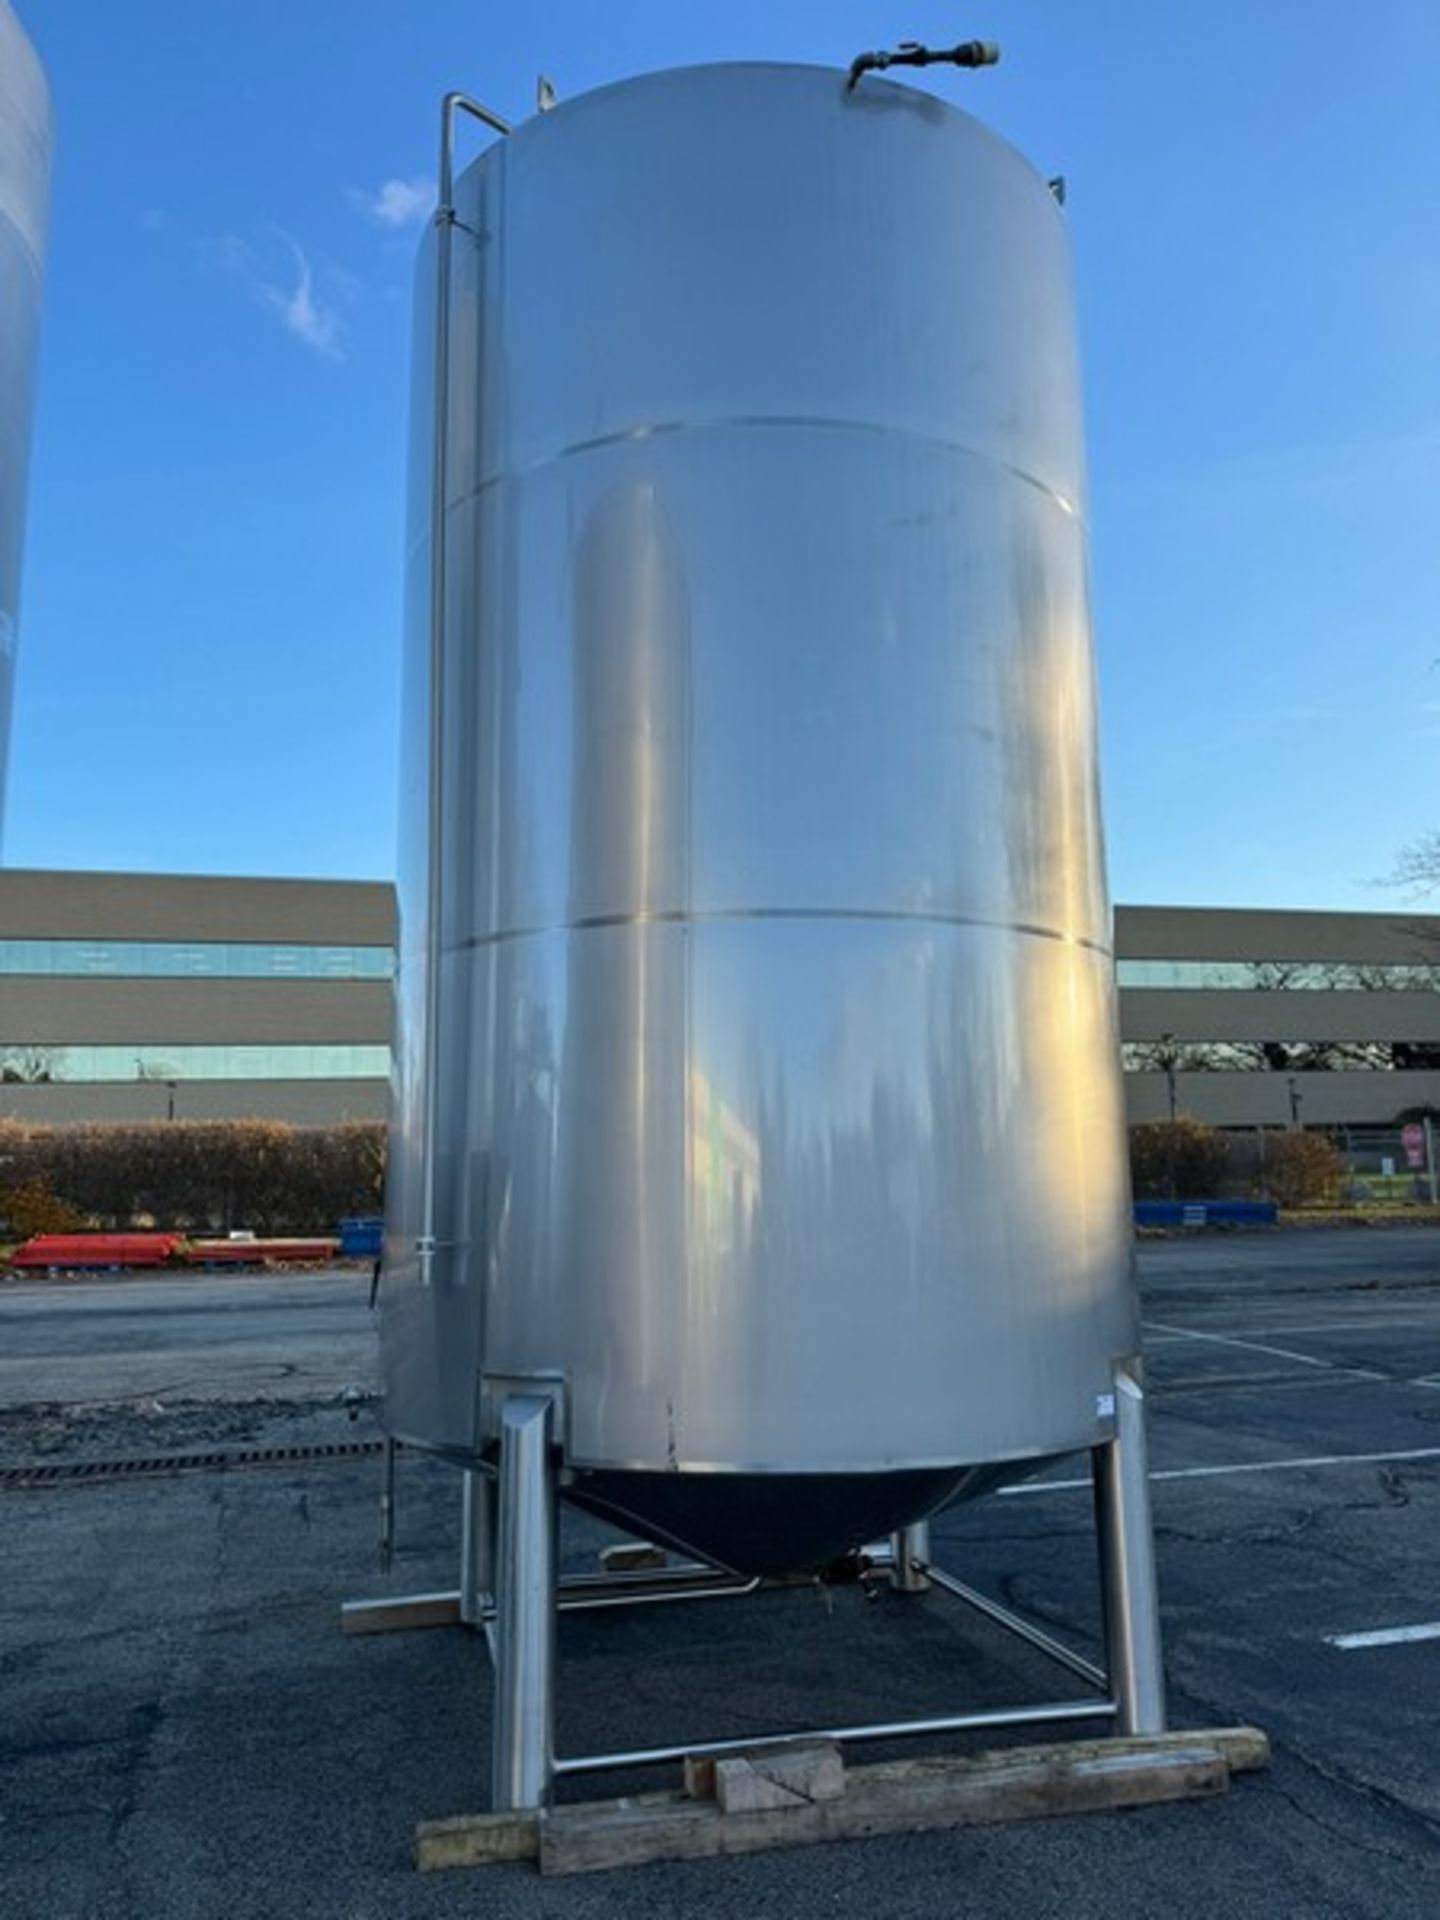 2012 Specific Mechanical Systems 200 BBL Capacity S/S Cold Liquor Tank, S/N RMP-136-12-300, with S/S